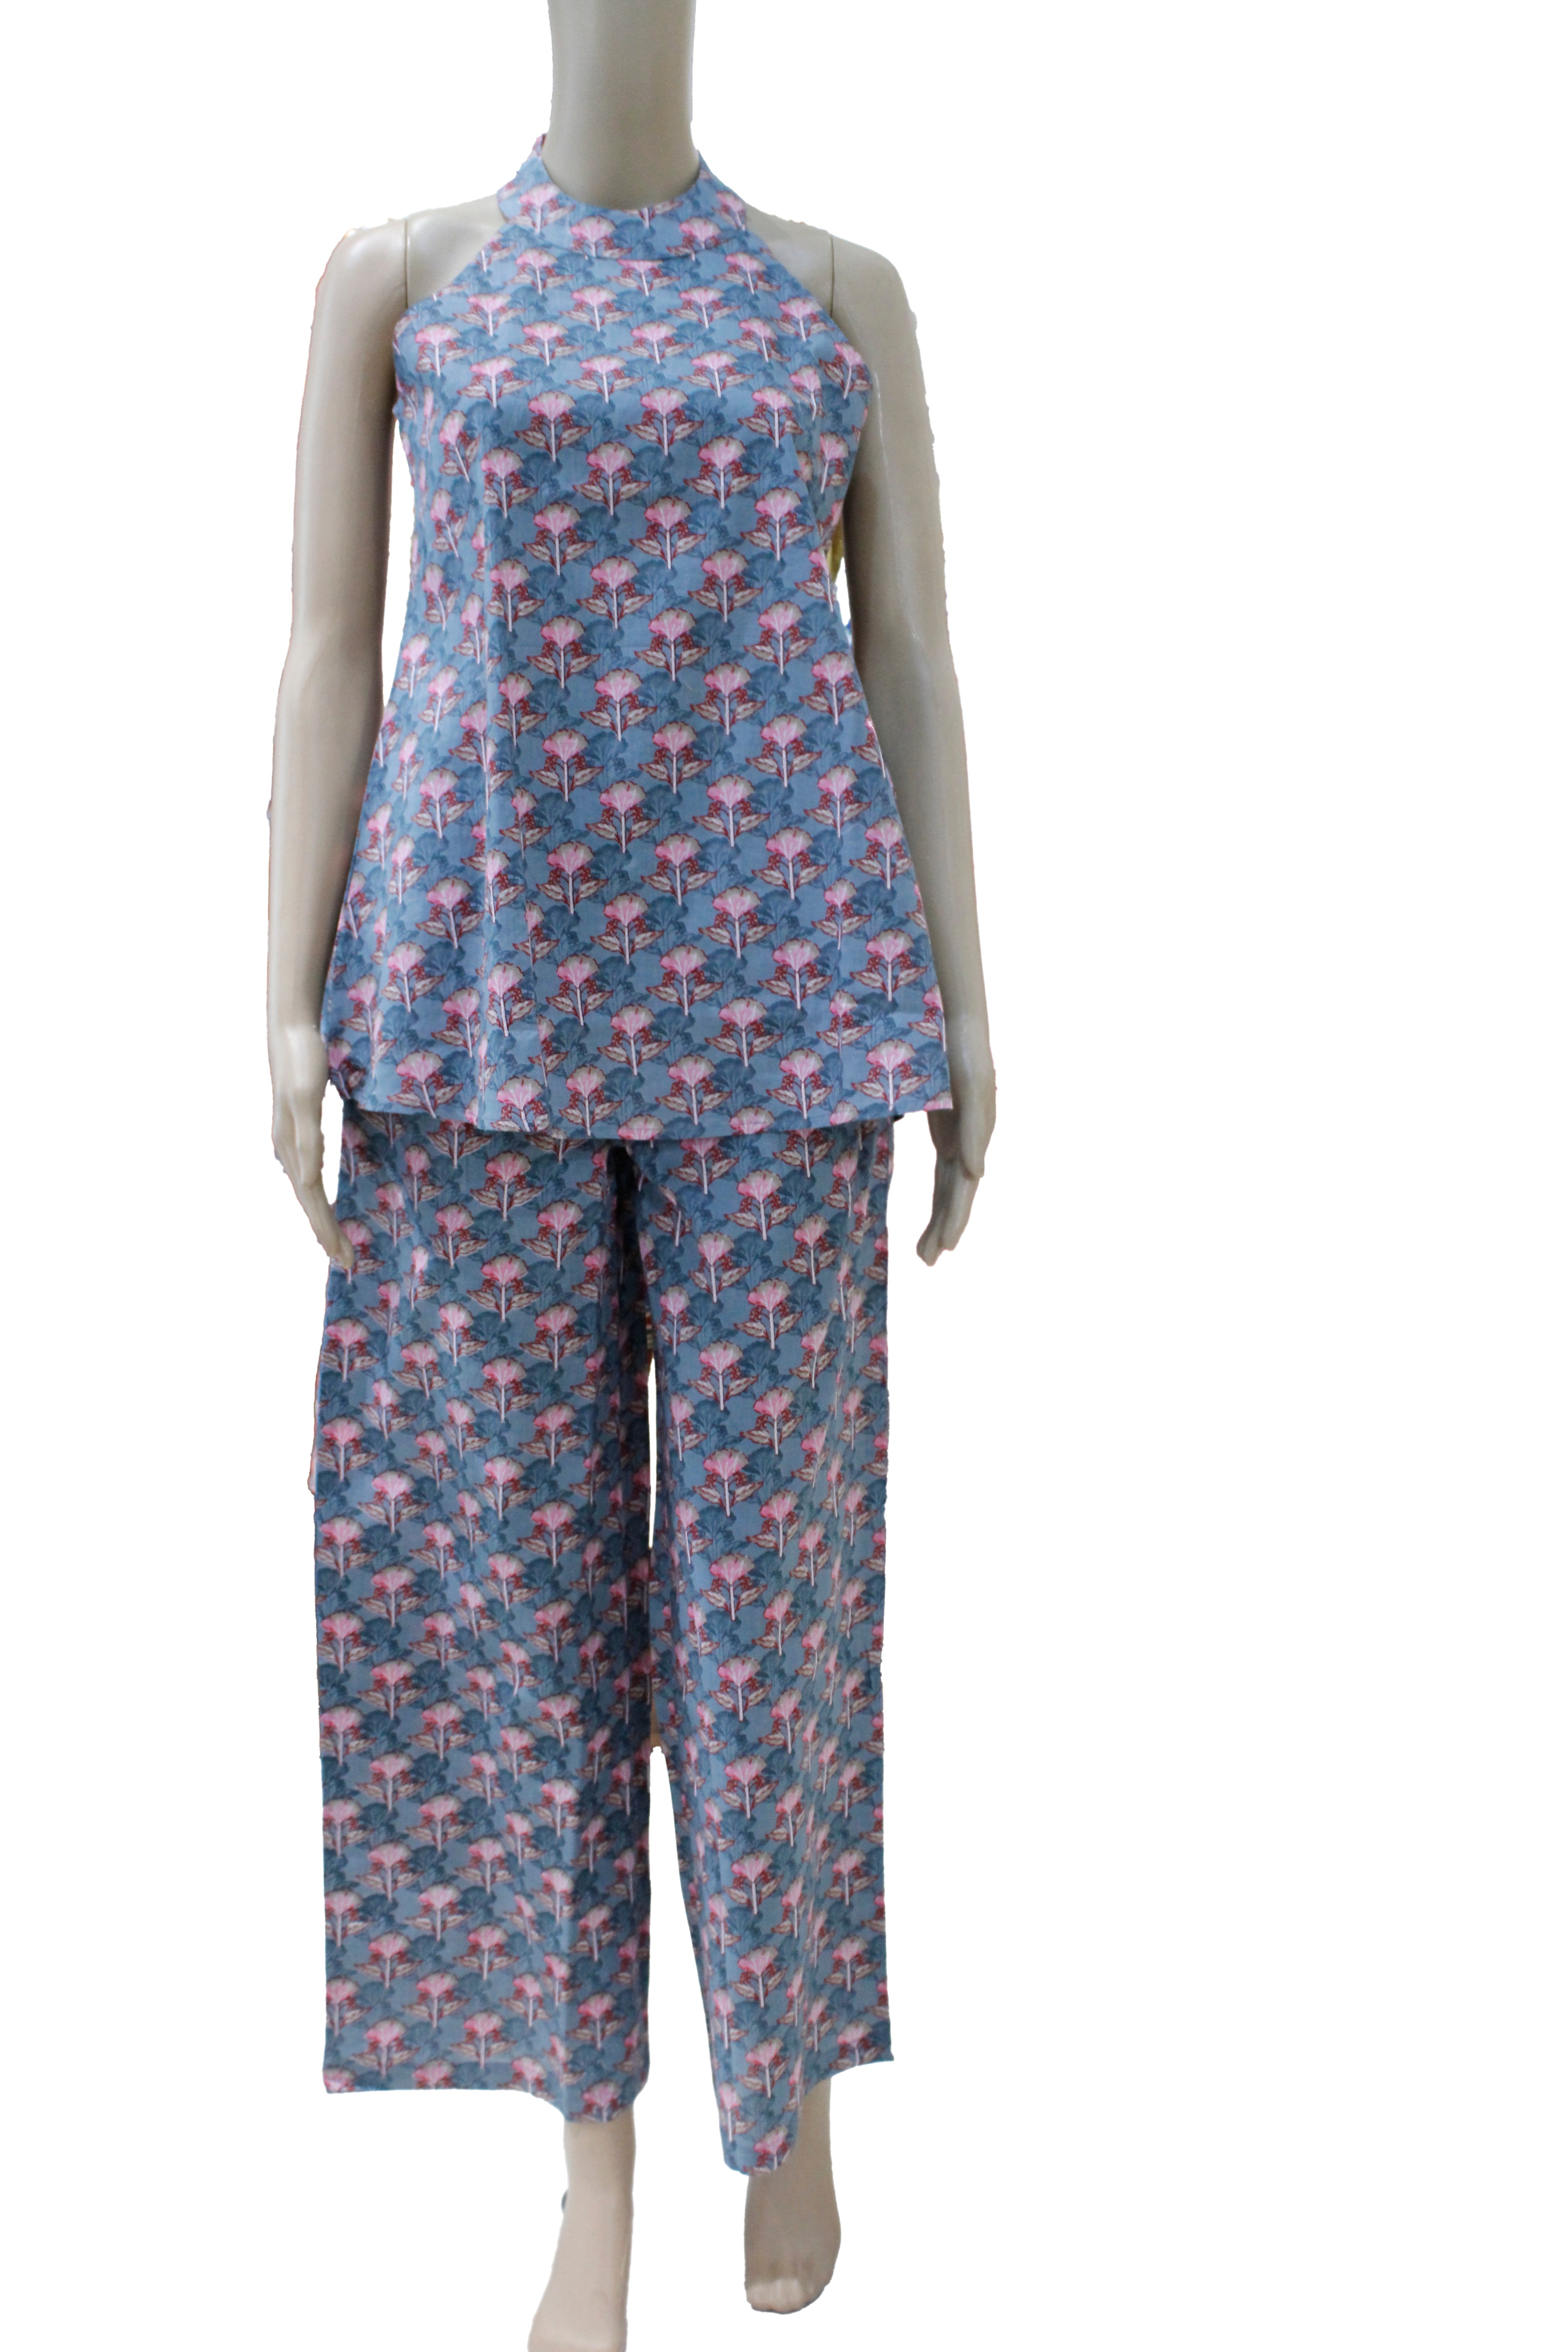 Crafted with comfort Floral Print Nightwear for Women